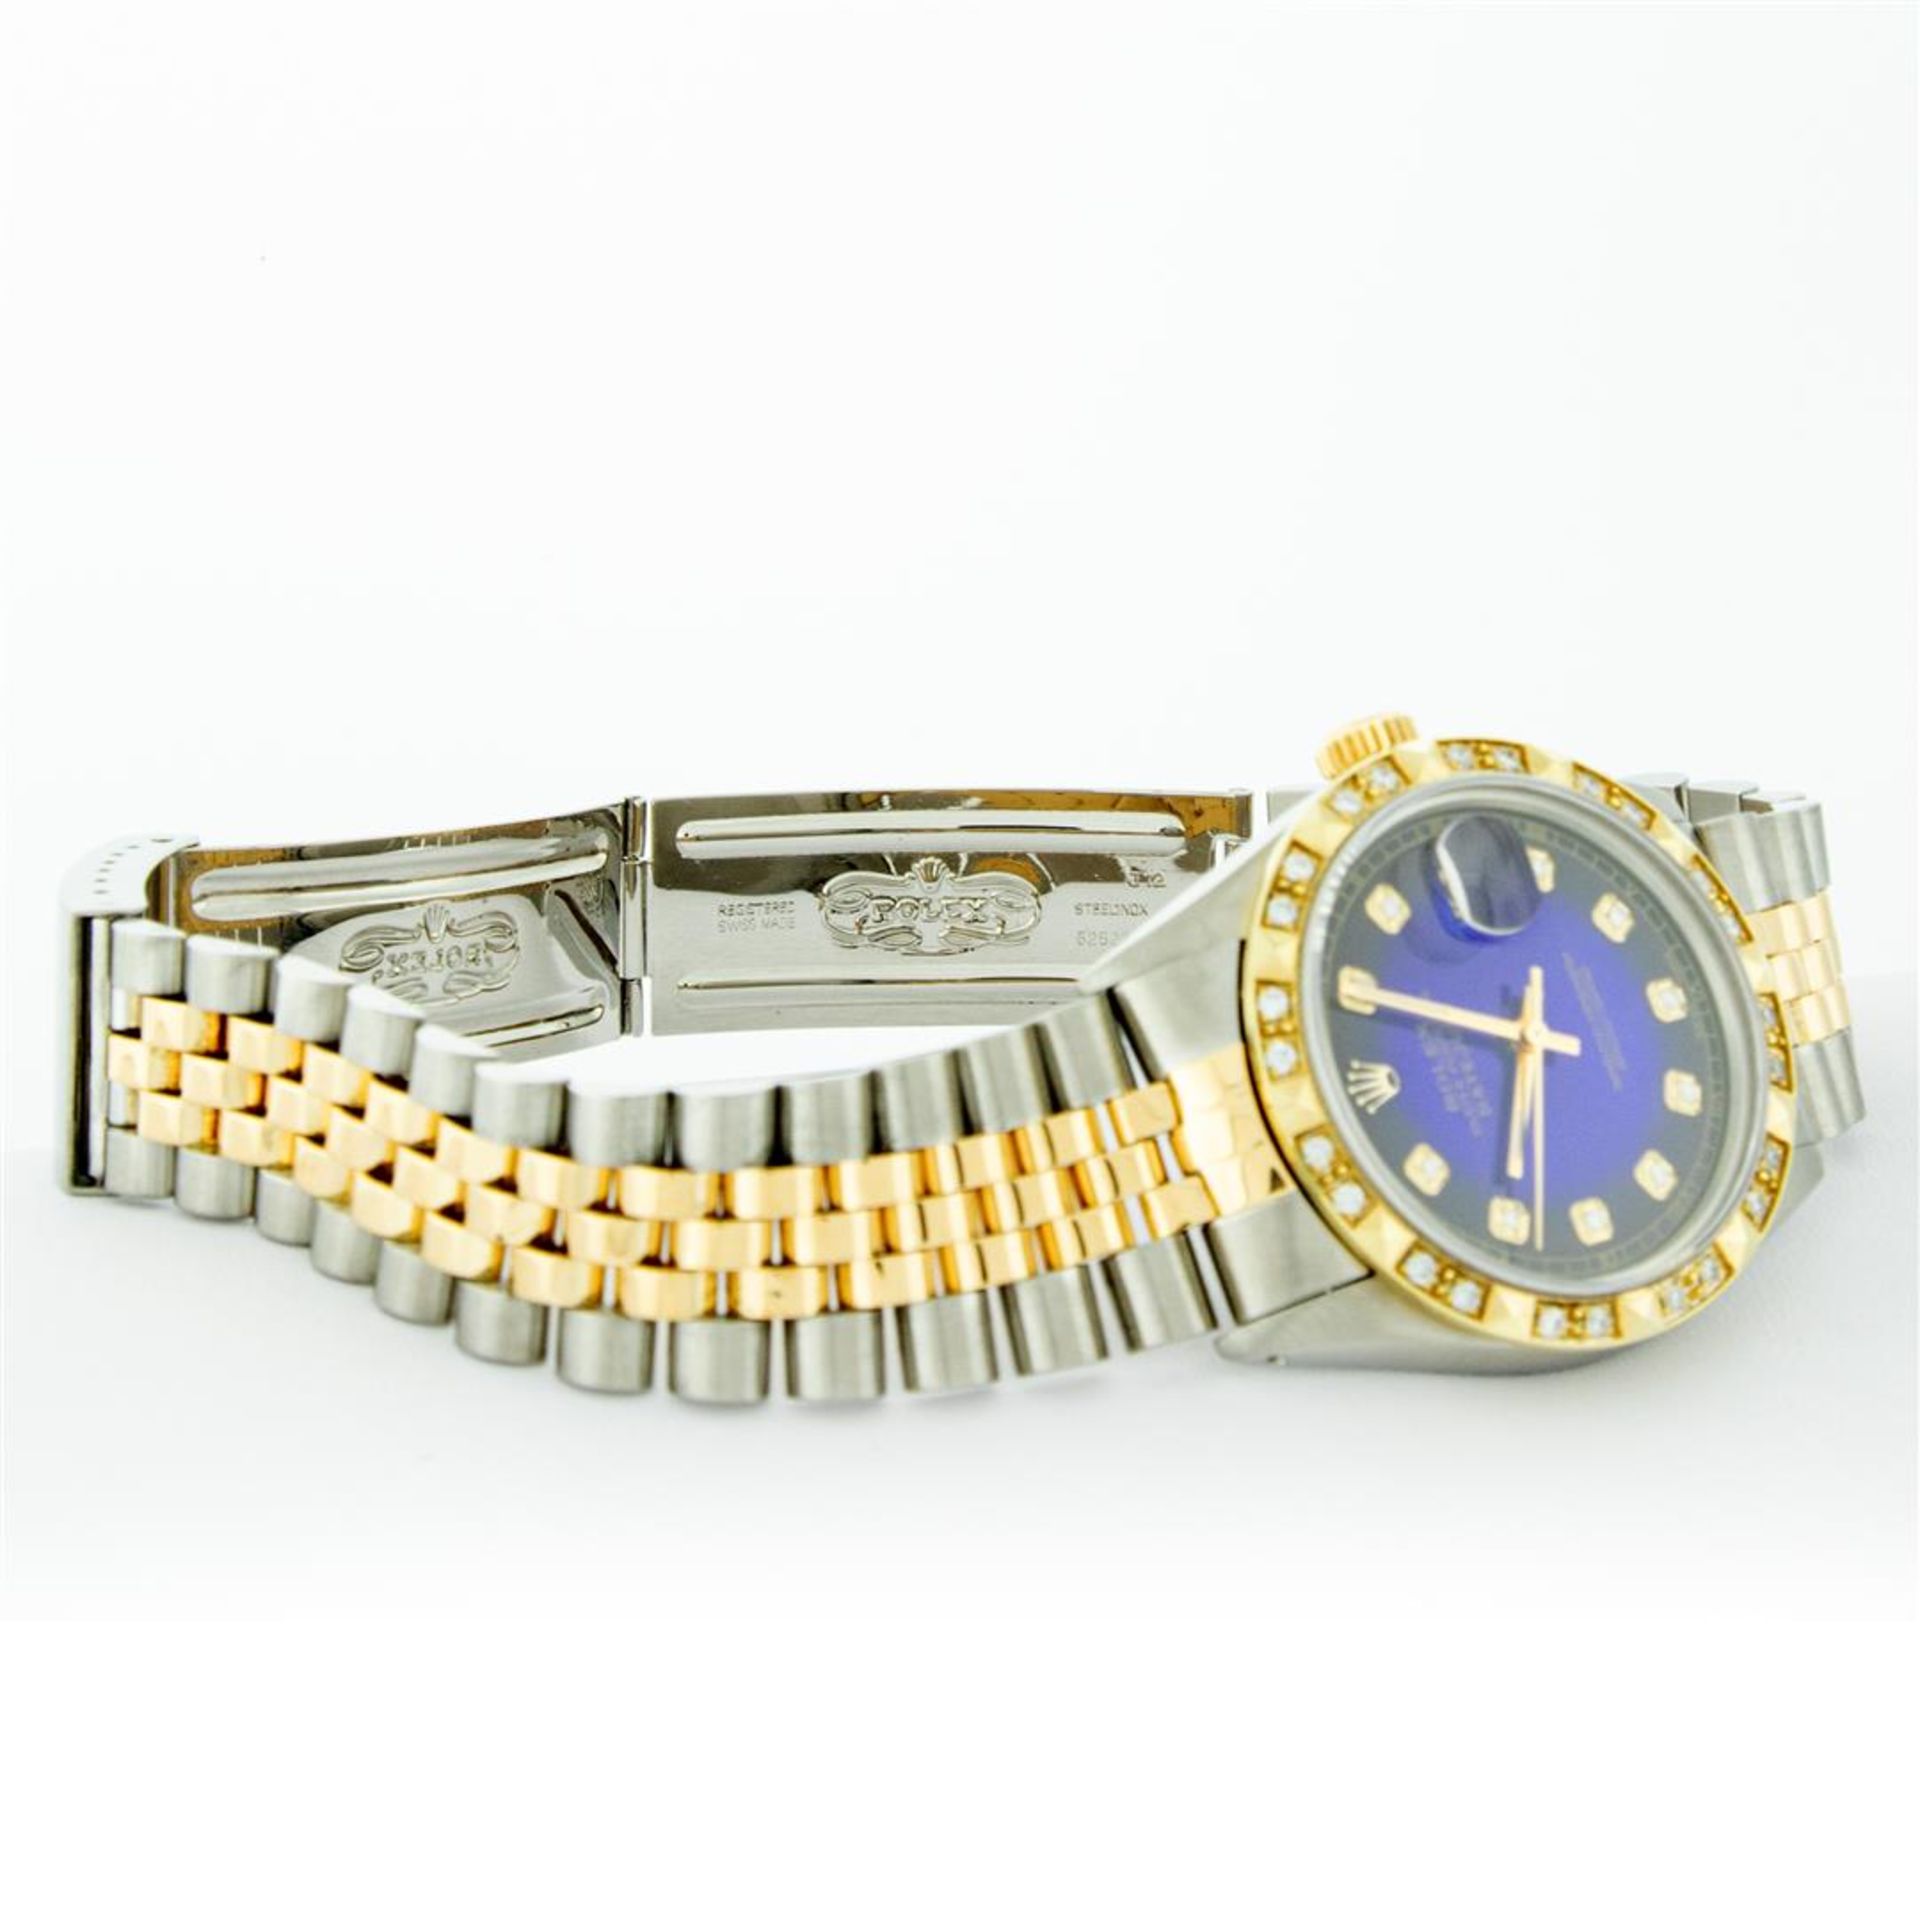 Rolex 2T Blue Vignette Pyramid Diamond Oyster Perpetual Datejust 36MM - Image 7 of 9